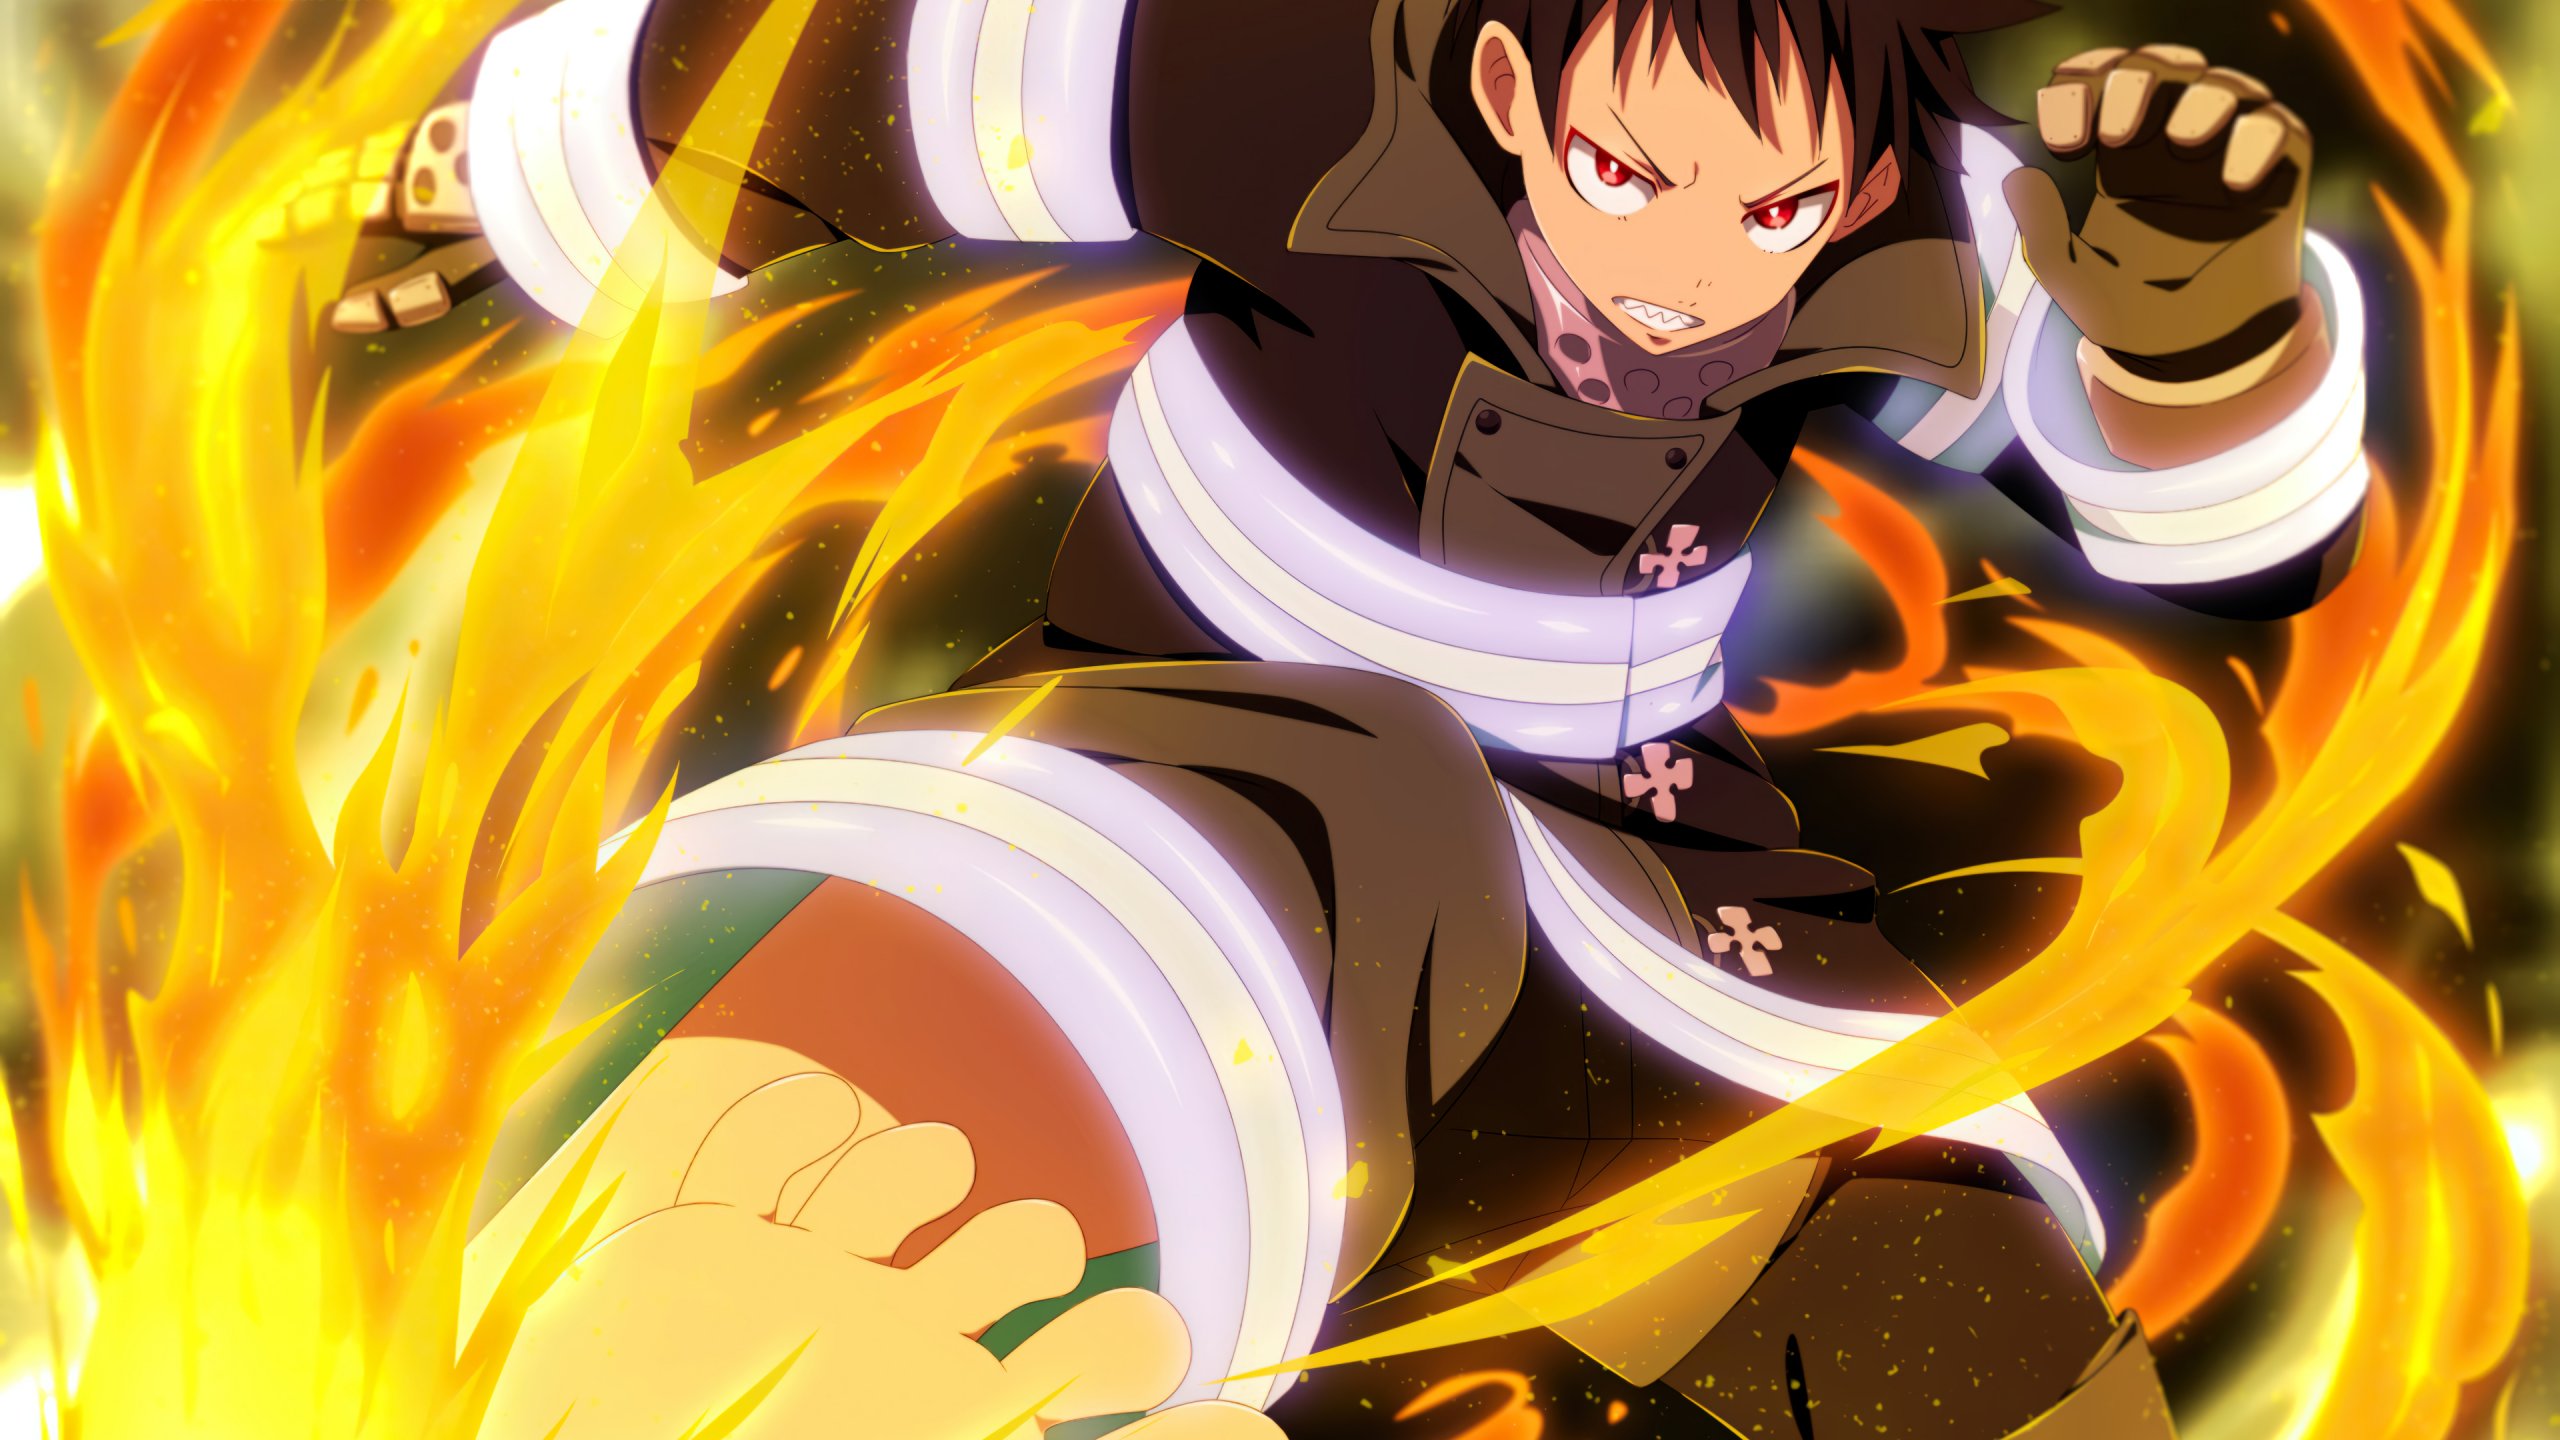 What Anime Is Shinra From? All About The Fire Wielder